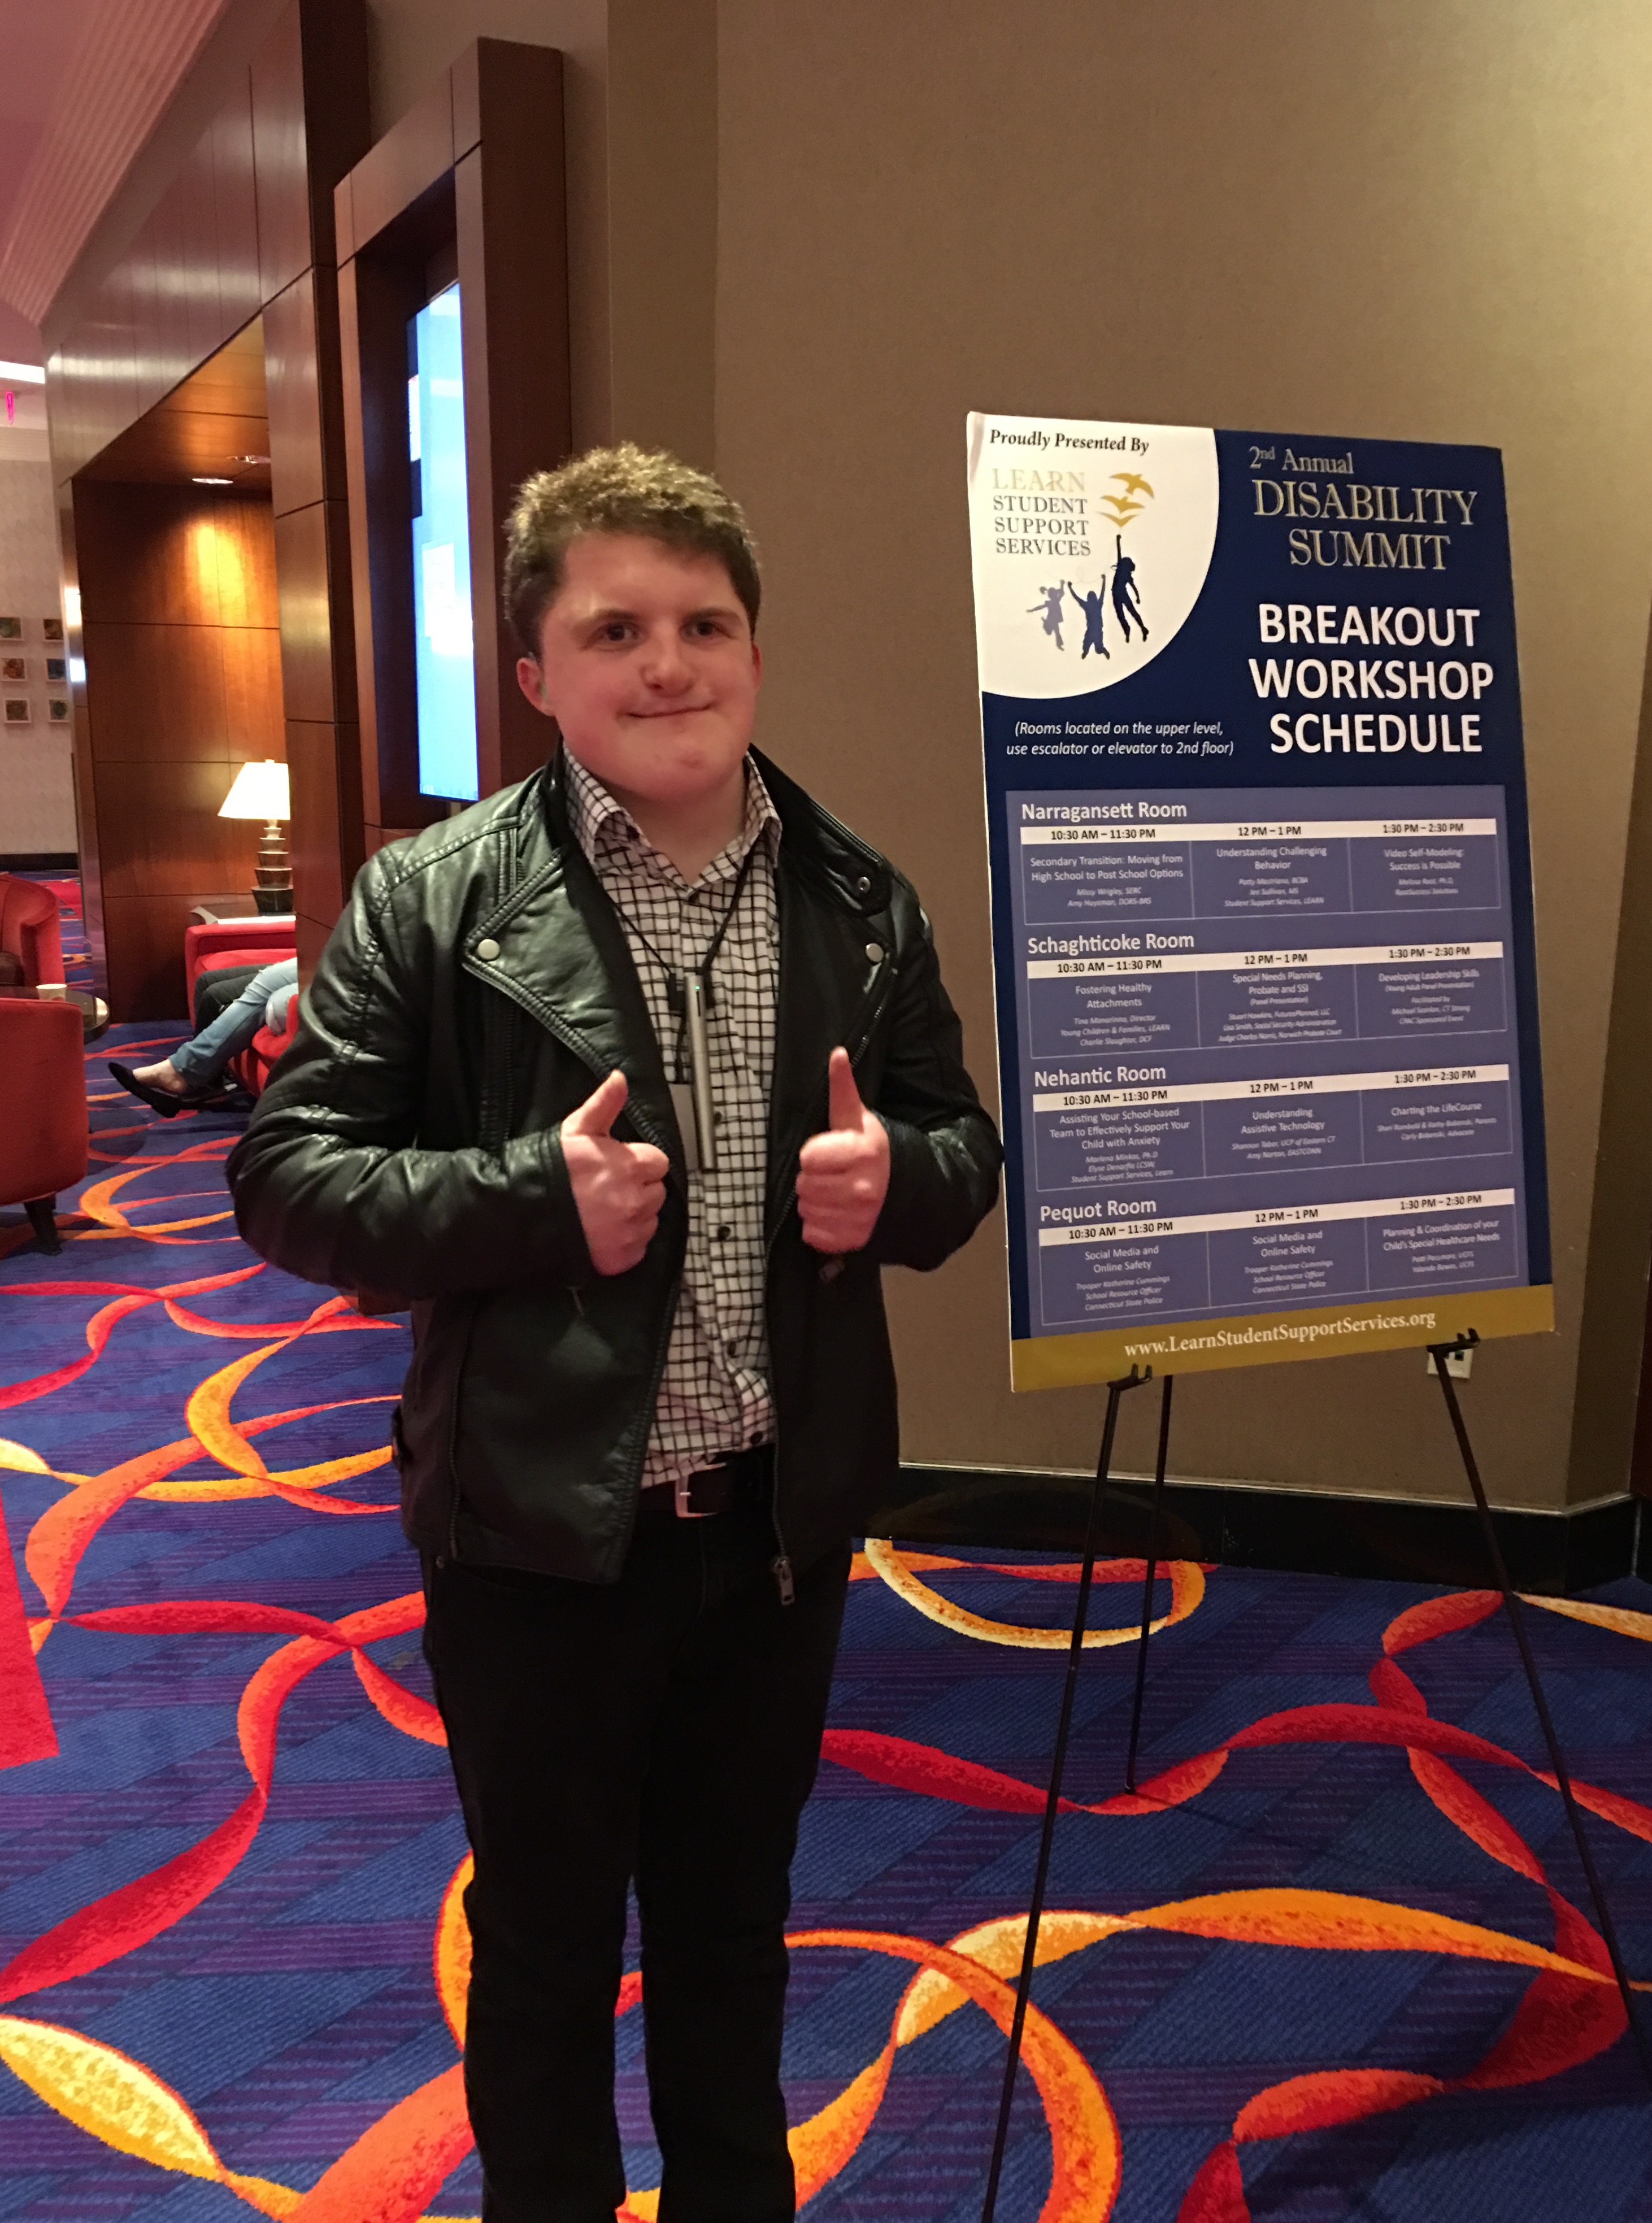 Alex in front of poster at conference making the thumbs up gesture.